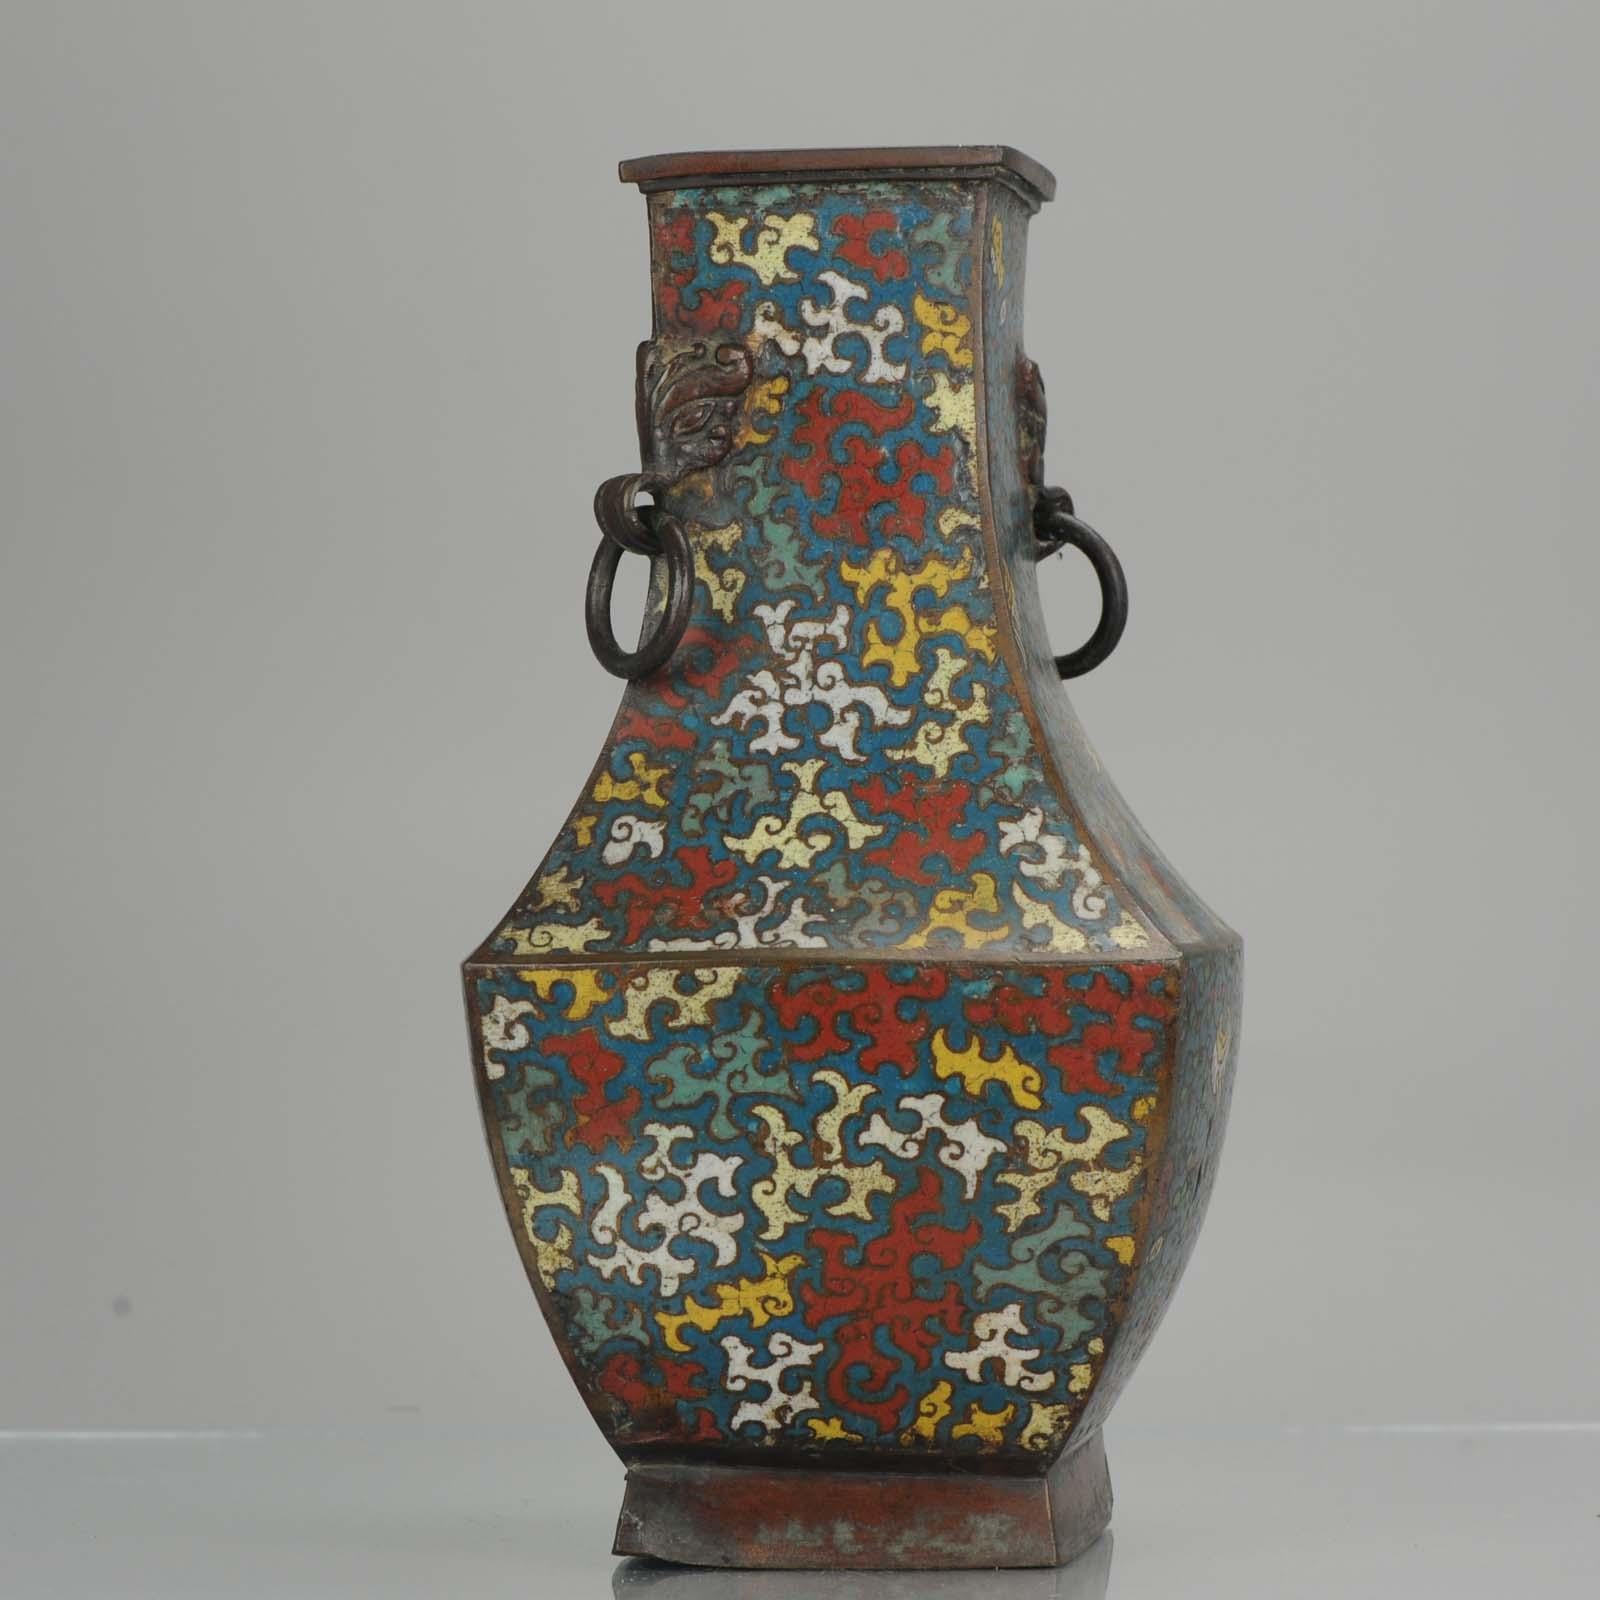 Antique Japanese Enamel Bronze Vase Archaic Vessel Japan, Edo or Meiji Period In Excellent Condition For Sale In Amsterdam, Noord Holland